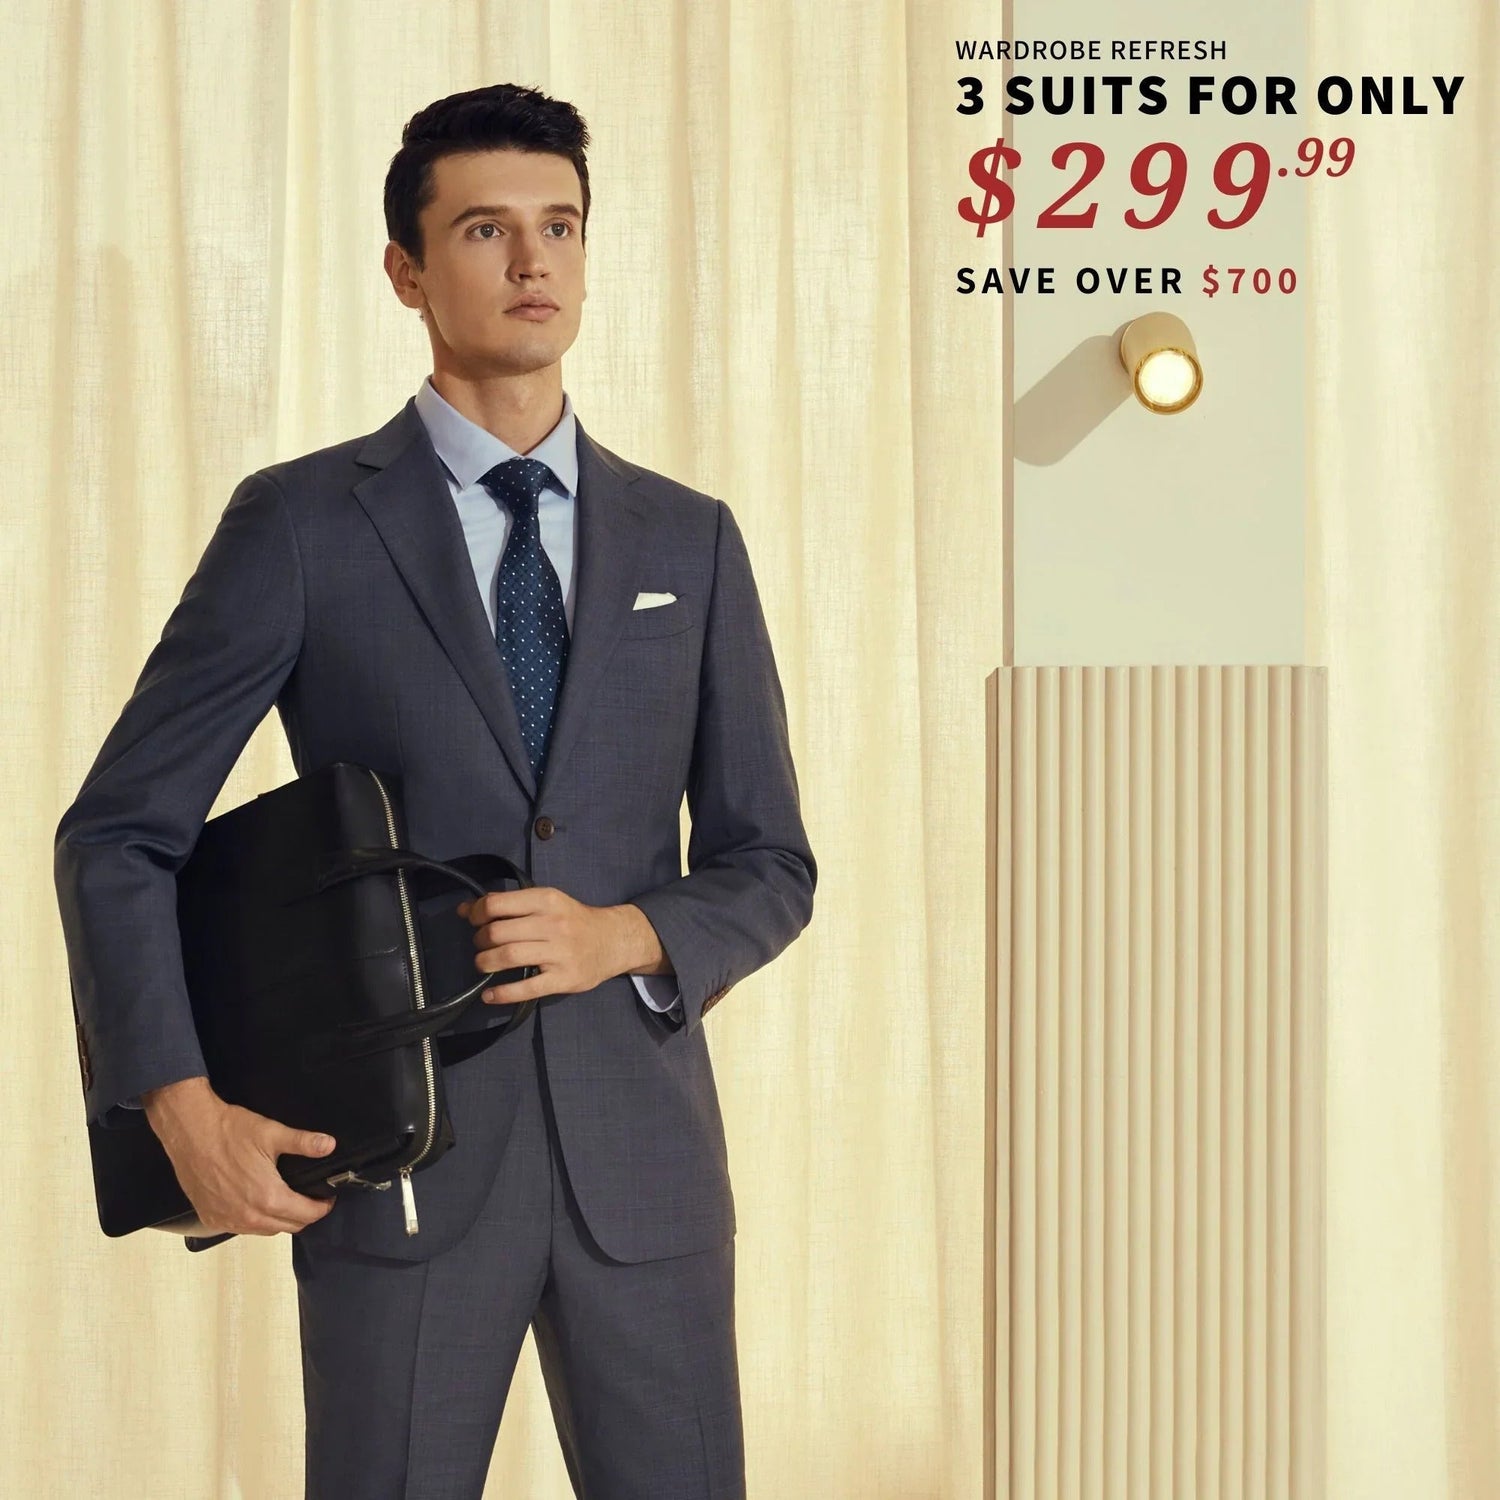 A man in a suit is holding a briefcase, his BYOB 3 Suits for $299, pants size and jacket size perfectly tailored for him.